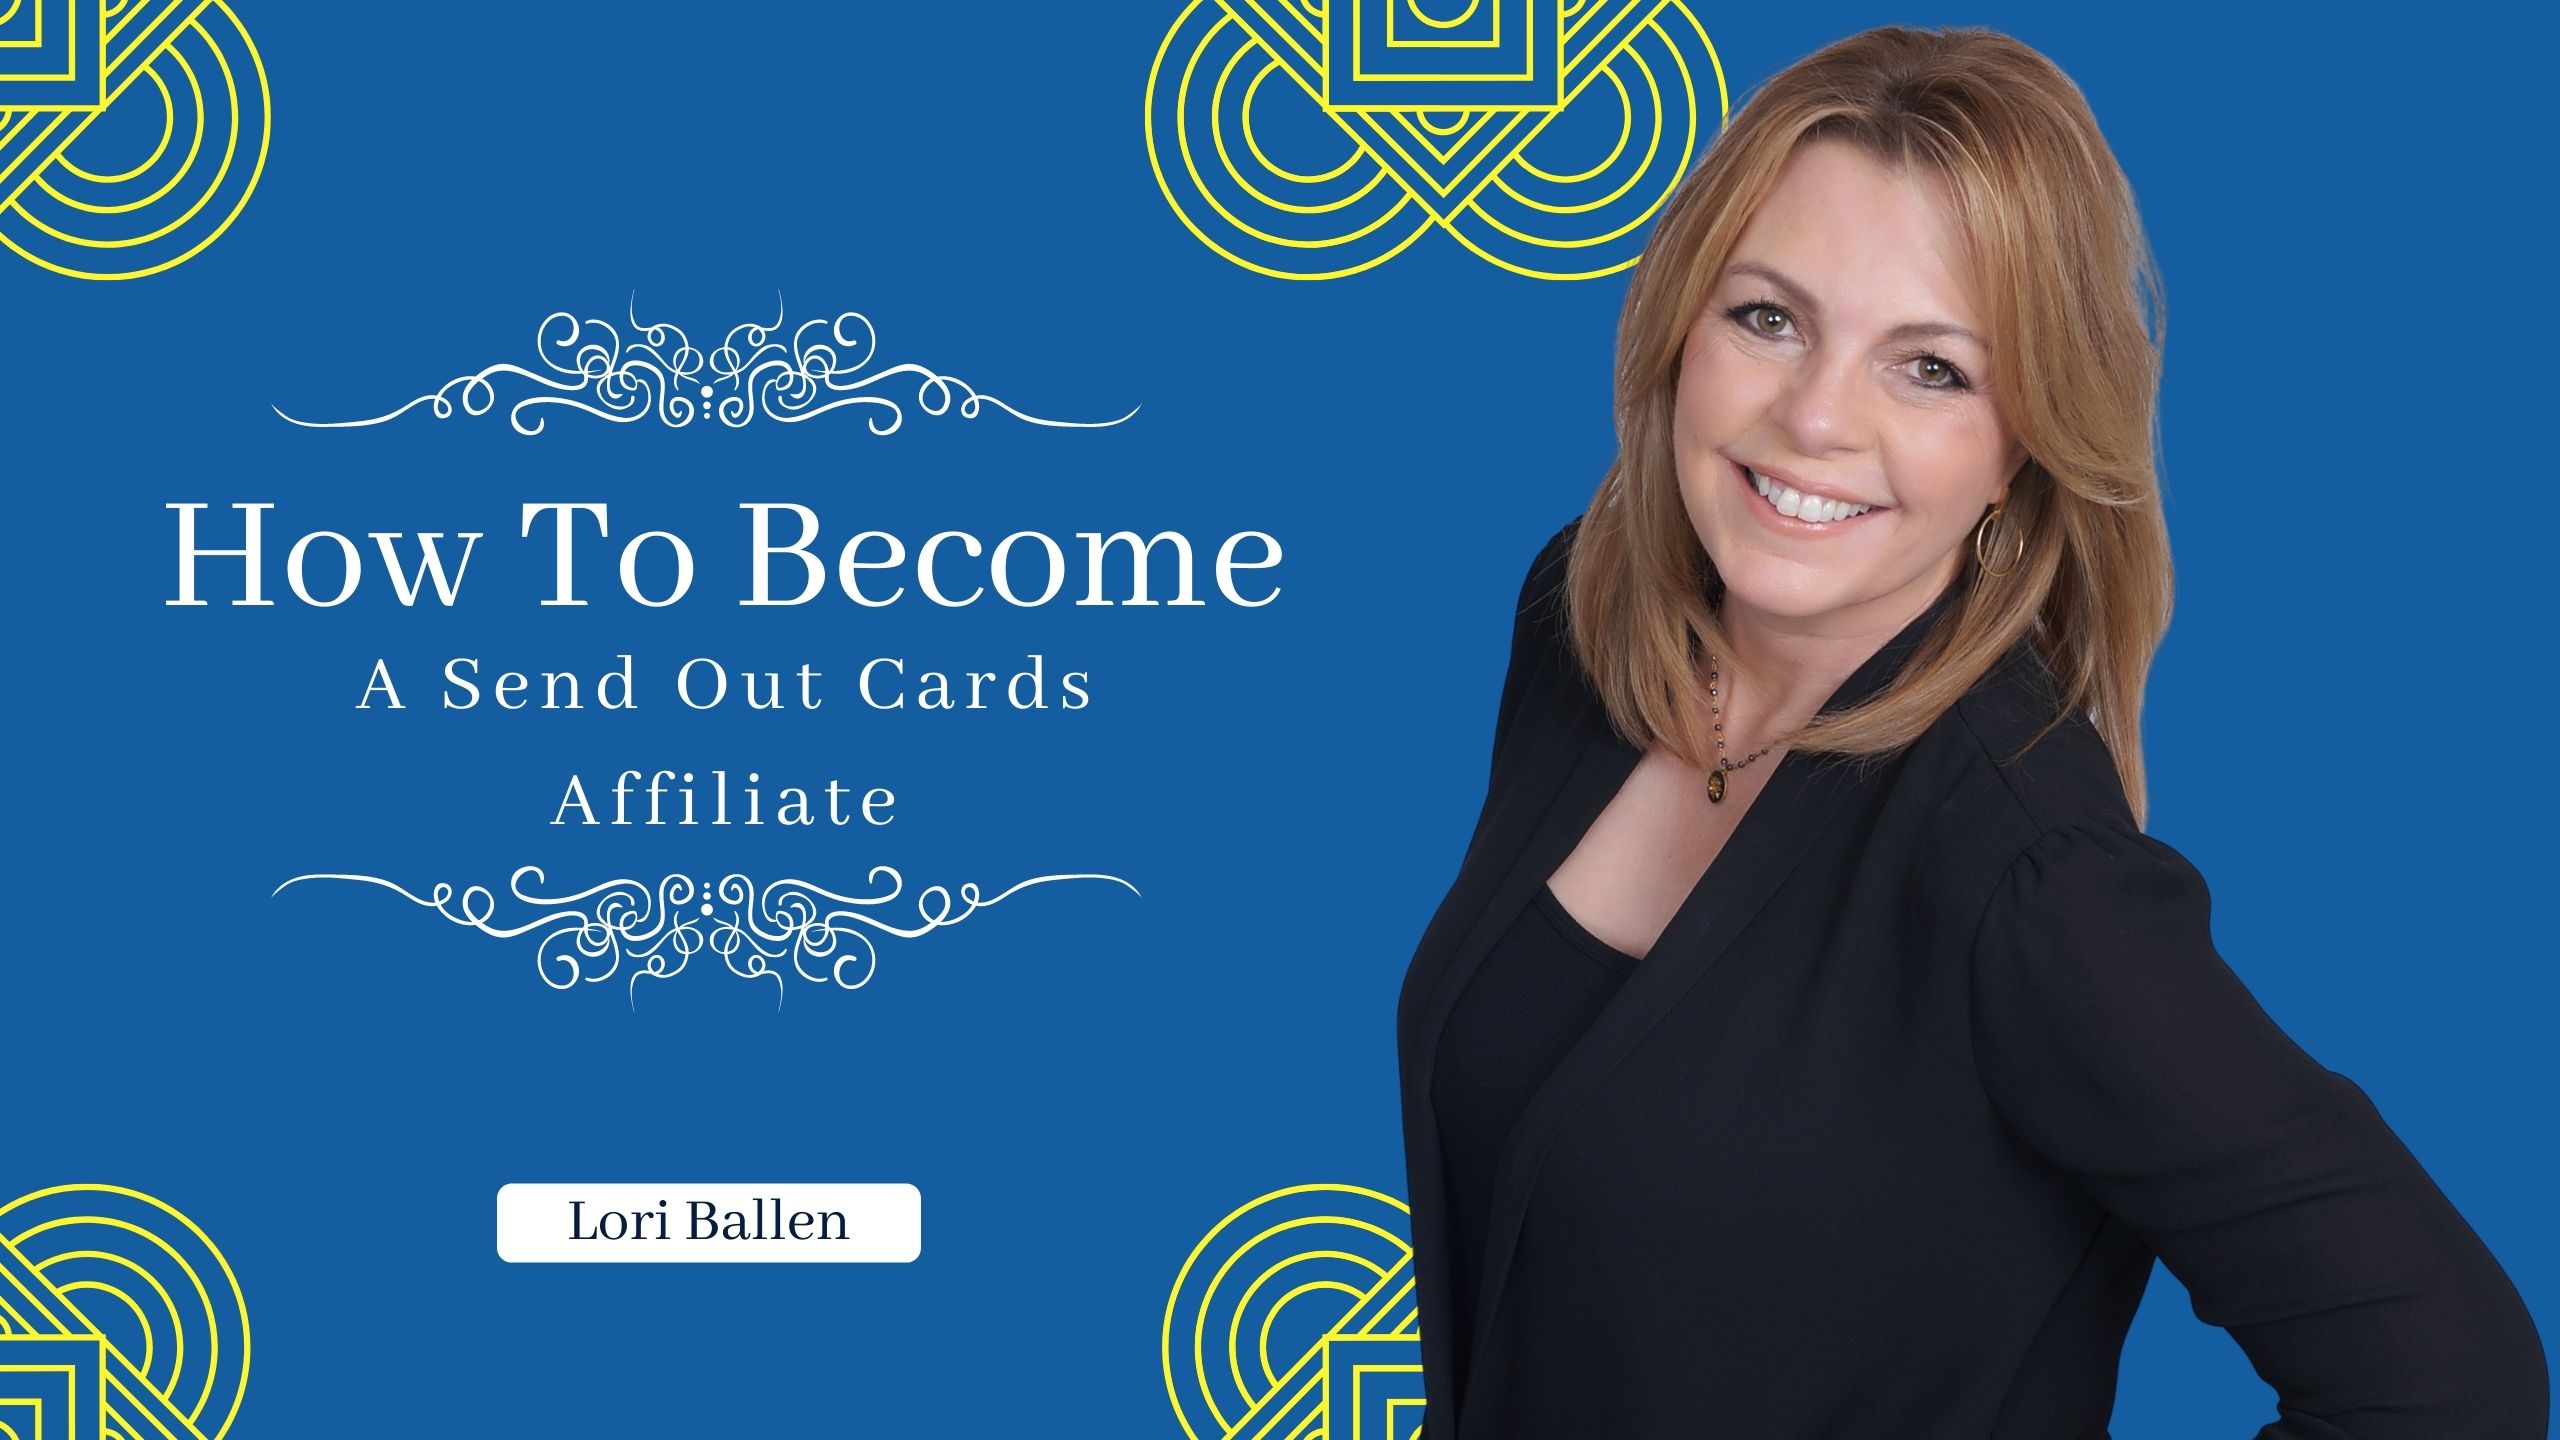 You can make money as an affiliate by promoting the Send Out Cards product to earn customers and building a team through affiliates.